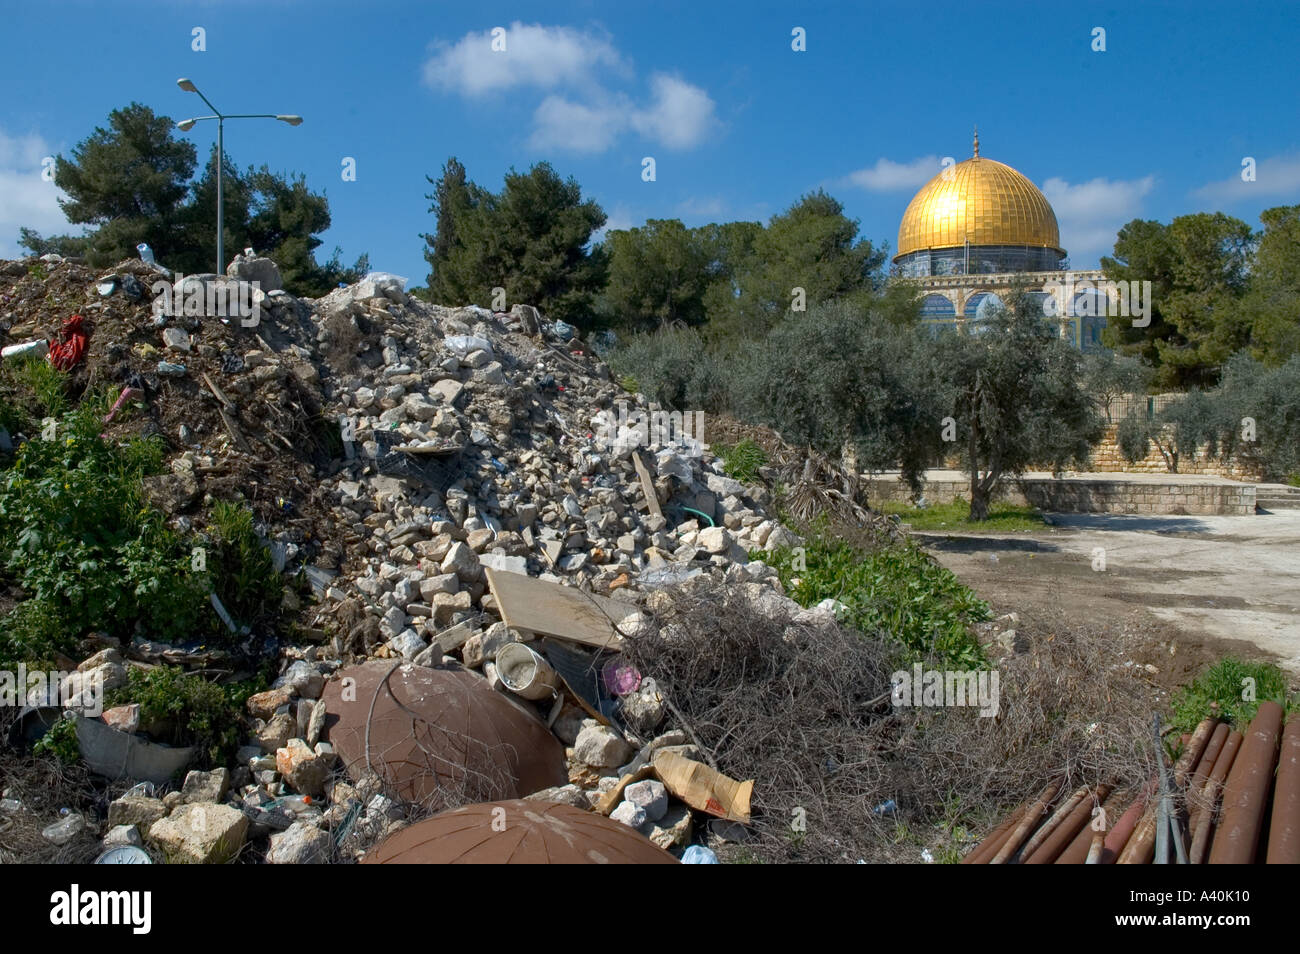 Israel Jerusalem Old City Esplanade of the mosques The Dome of the Rock piles of rubbles from controversial building sites with dome in bkgd Stock Photo